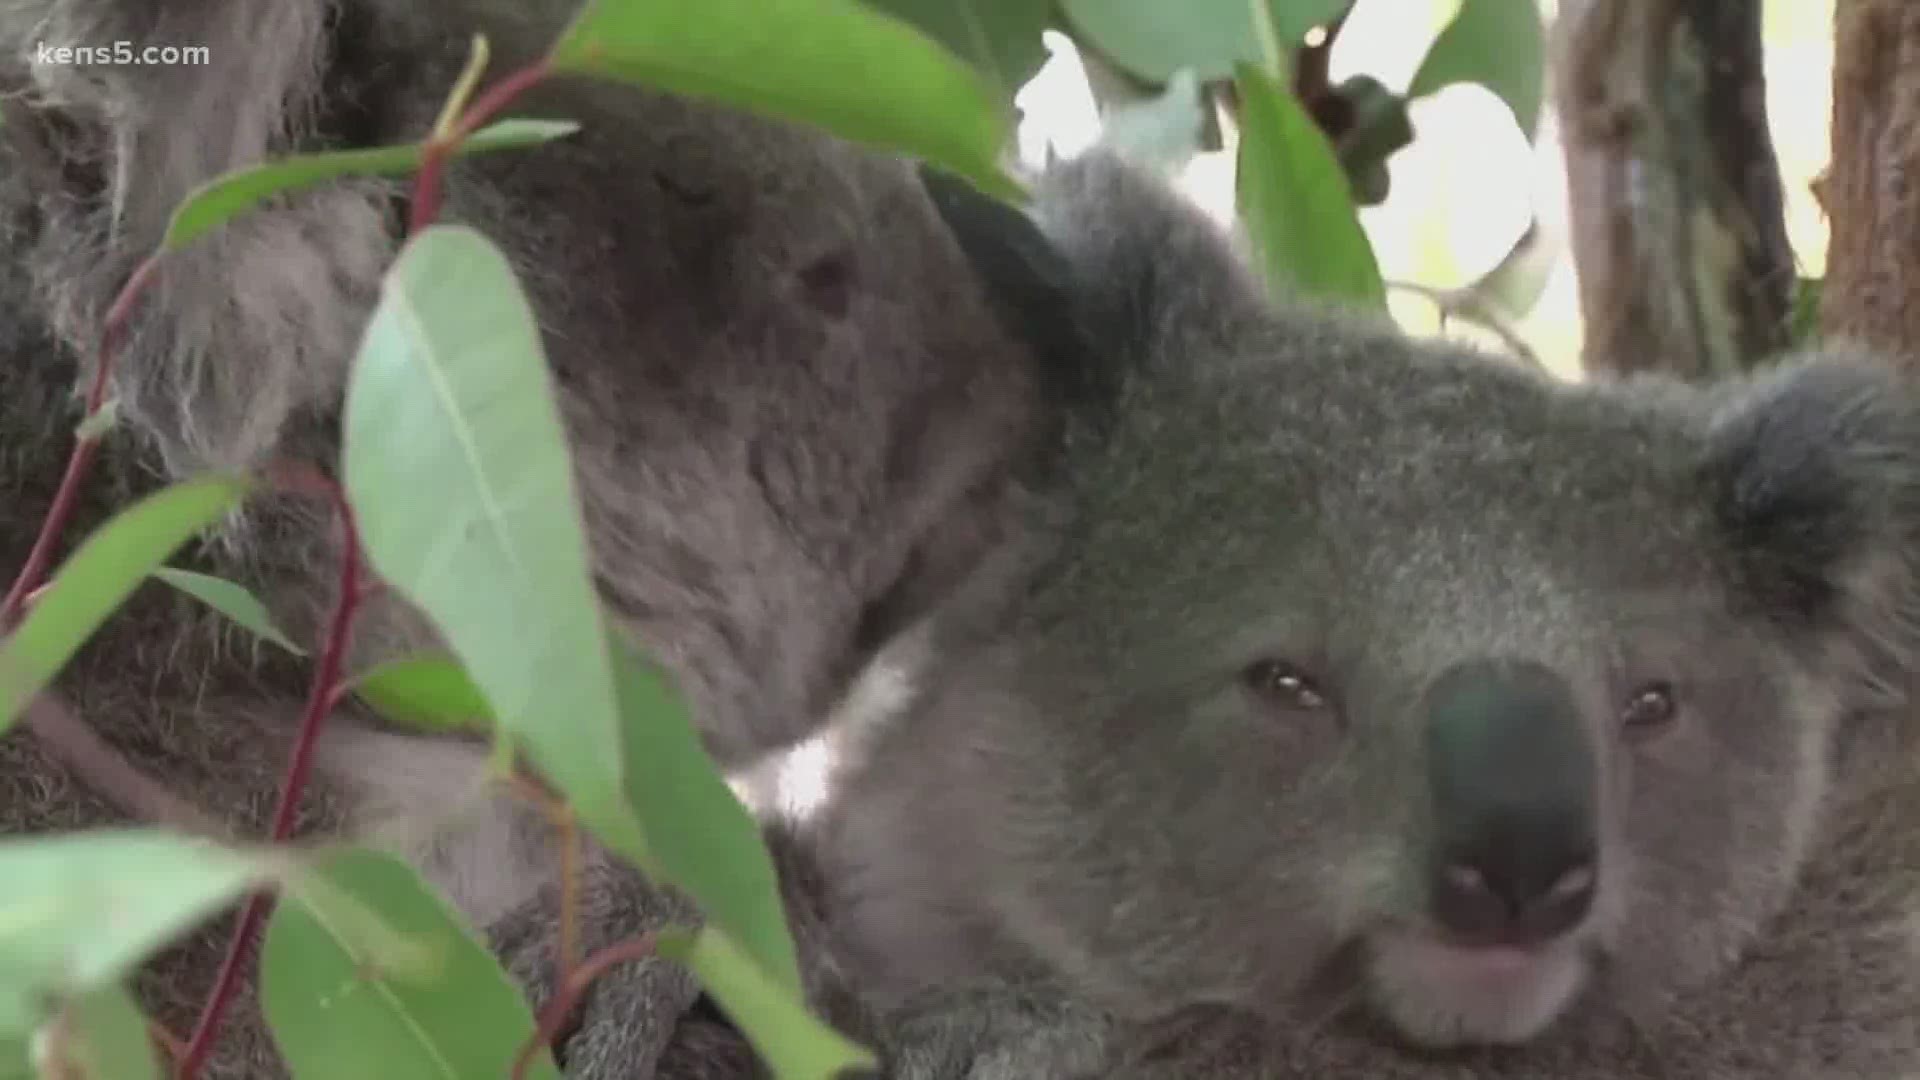 Koalas are at risk of becoming extinct in Australia after the 2019 brush fires destroyed up to 81% of their habitats.